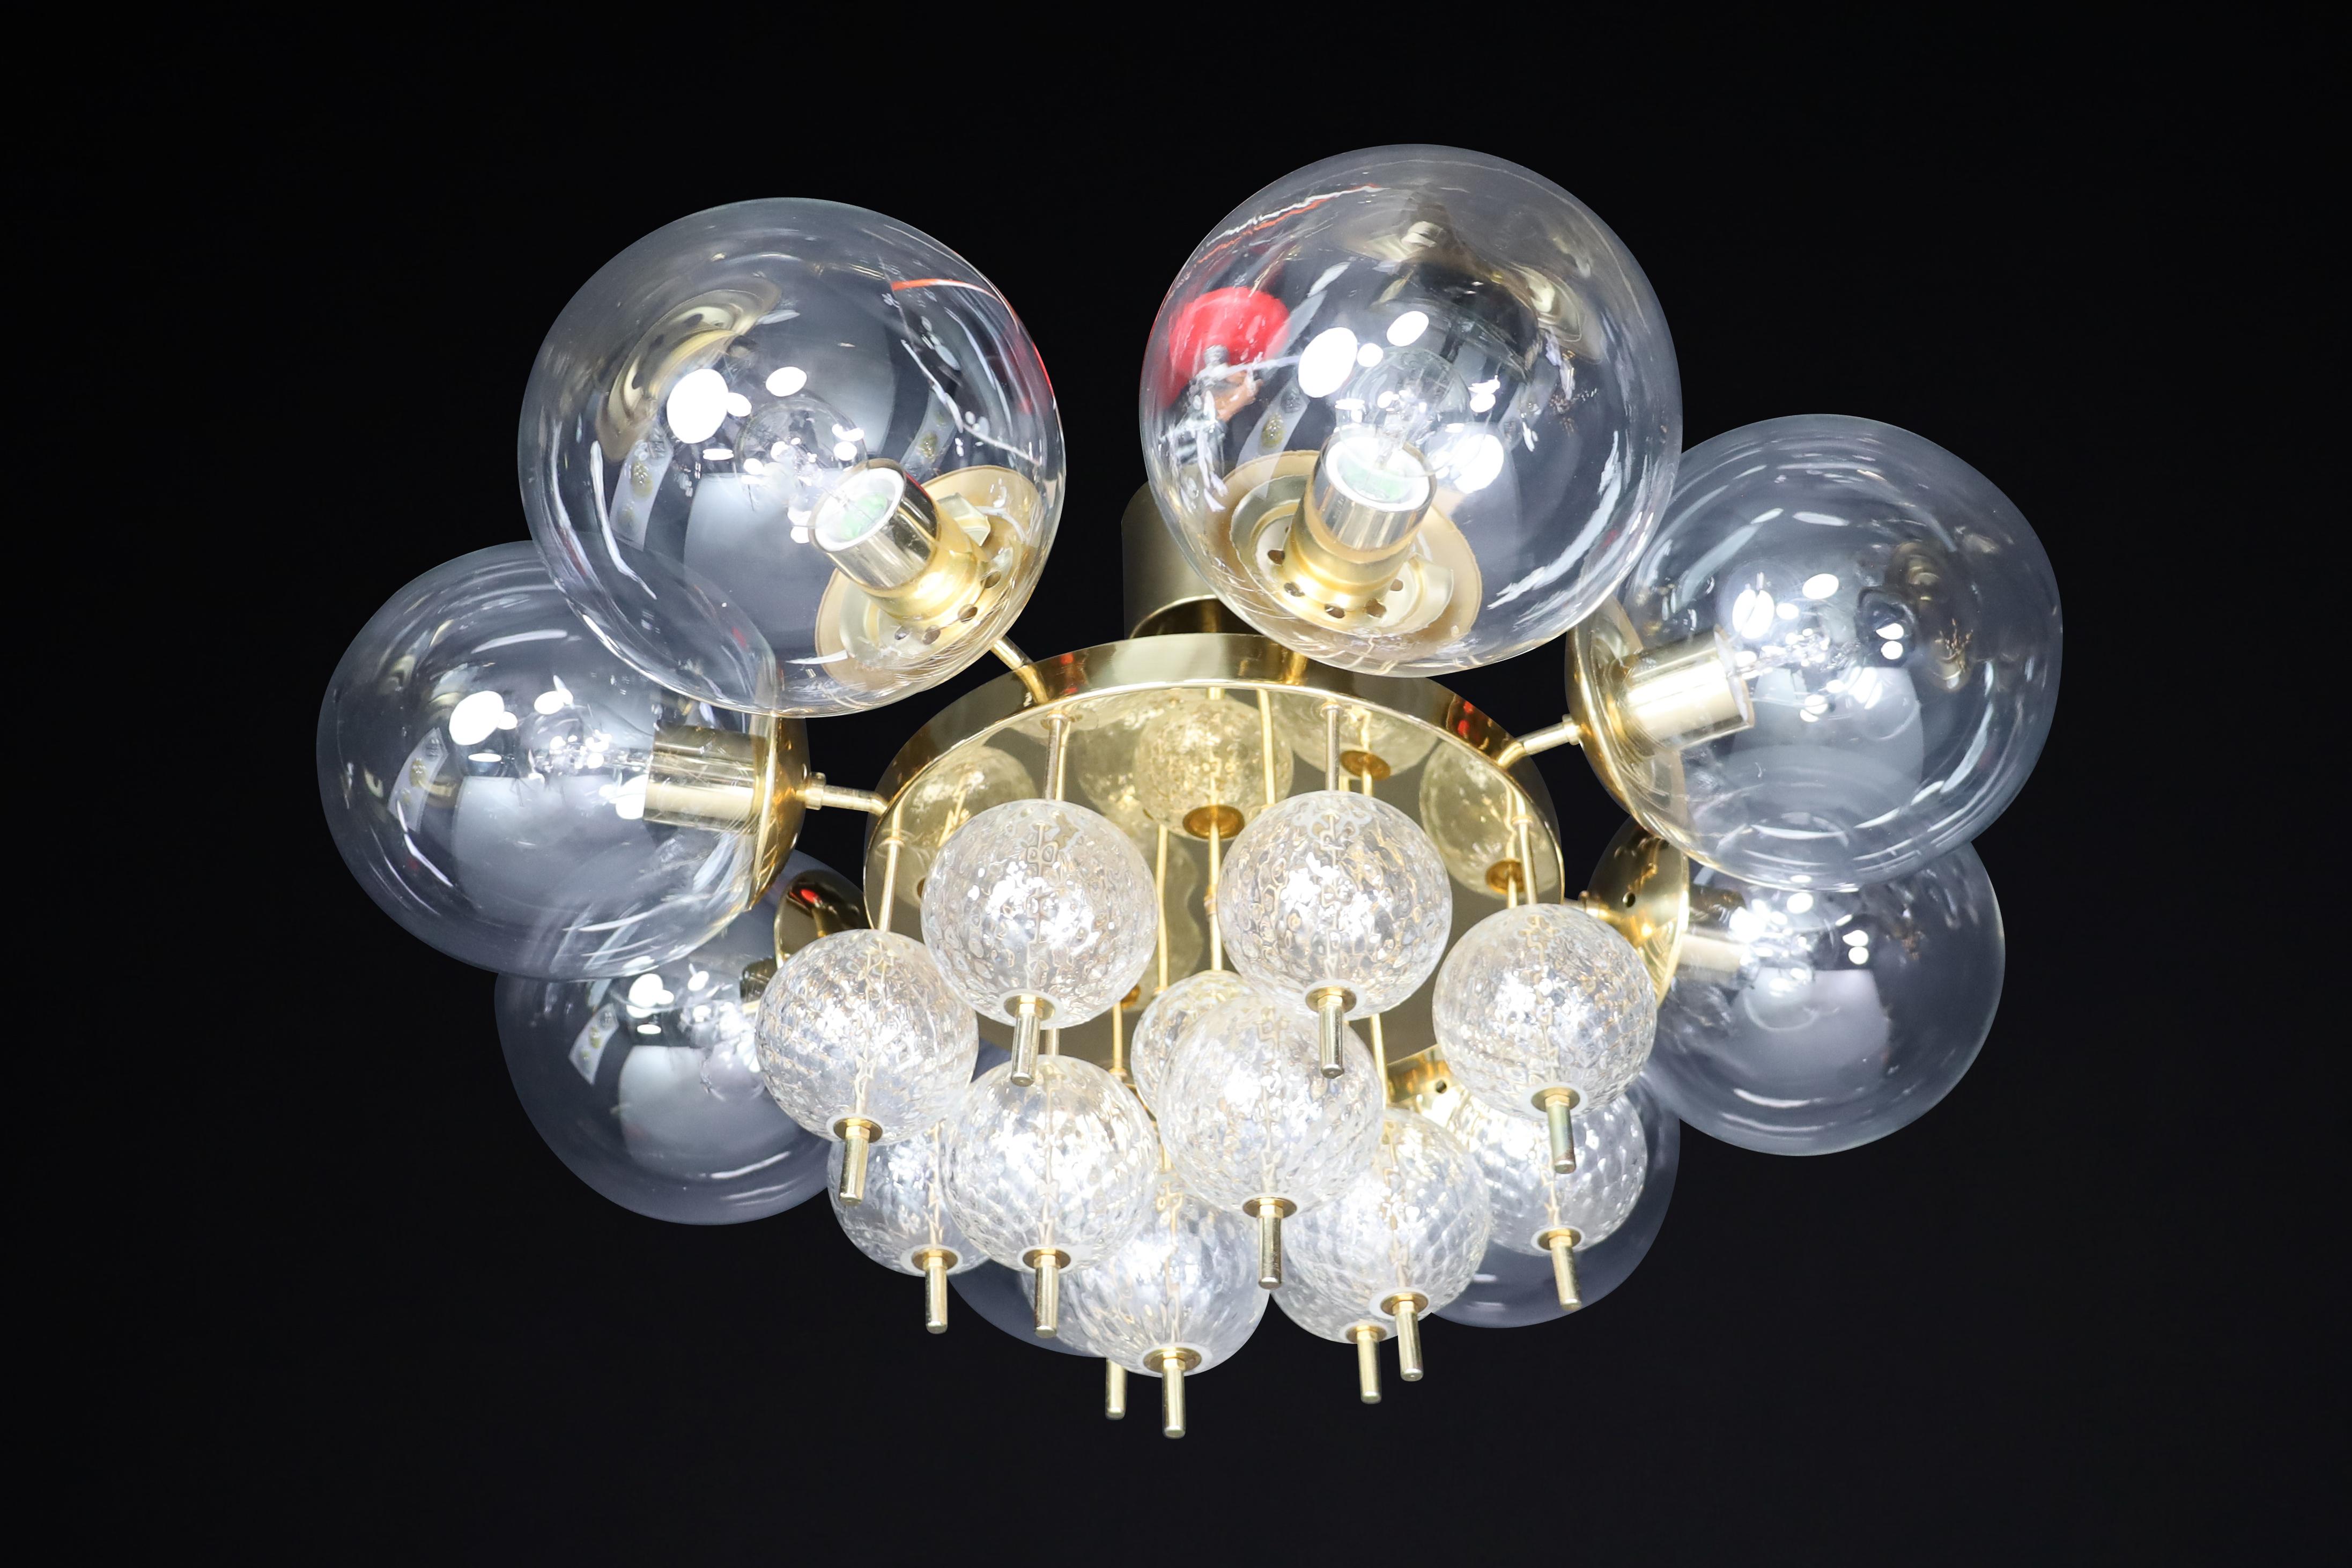 Mid-Century Brass chandelier by Preciosa in Czechia 1960s

This Mid-Century chandelier, crafted in the 1960s, boasts a brass fixture and hand-blown glass globes from the renowned Preciosa Factory in Czechia. It features eight large clear glass